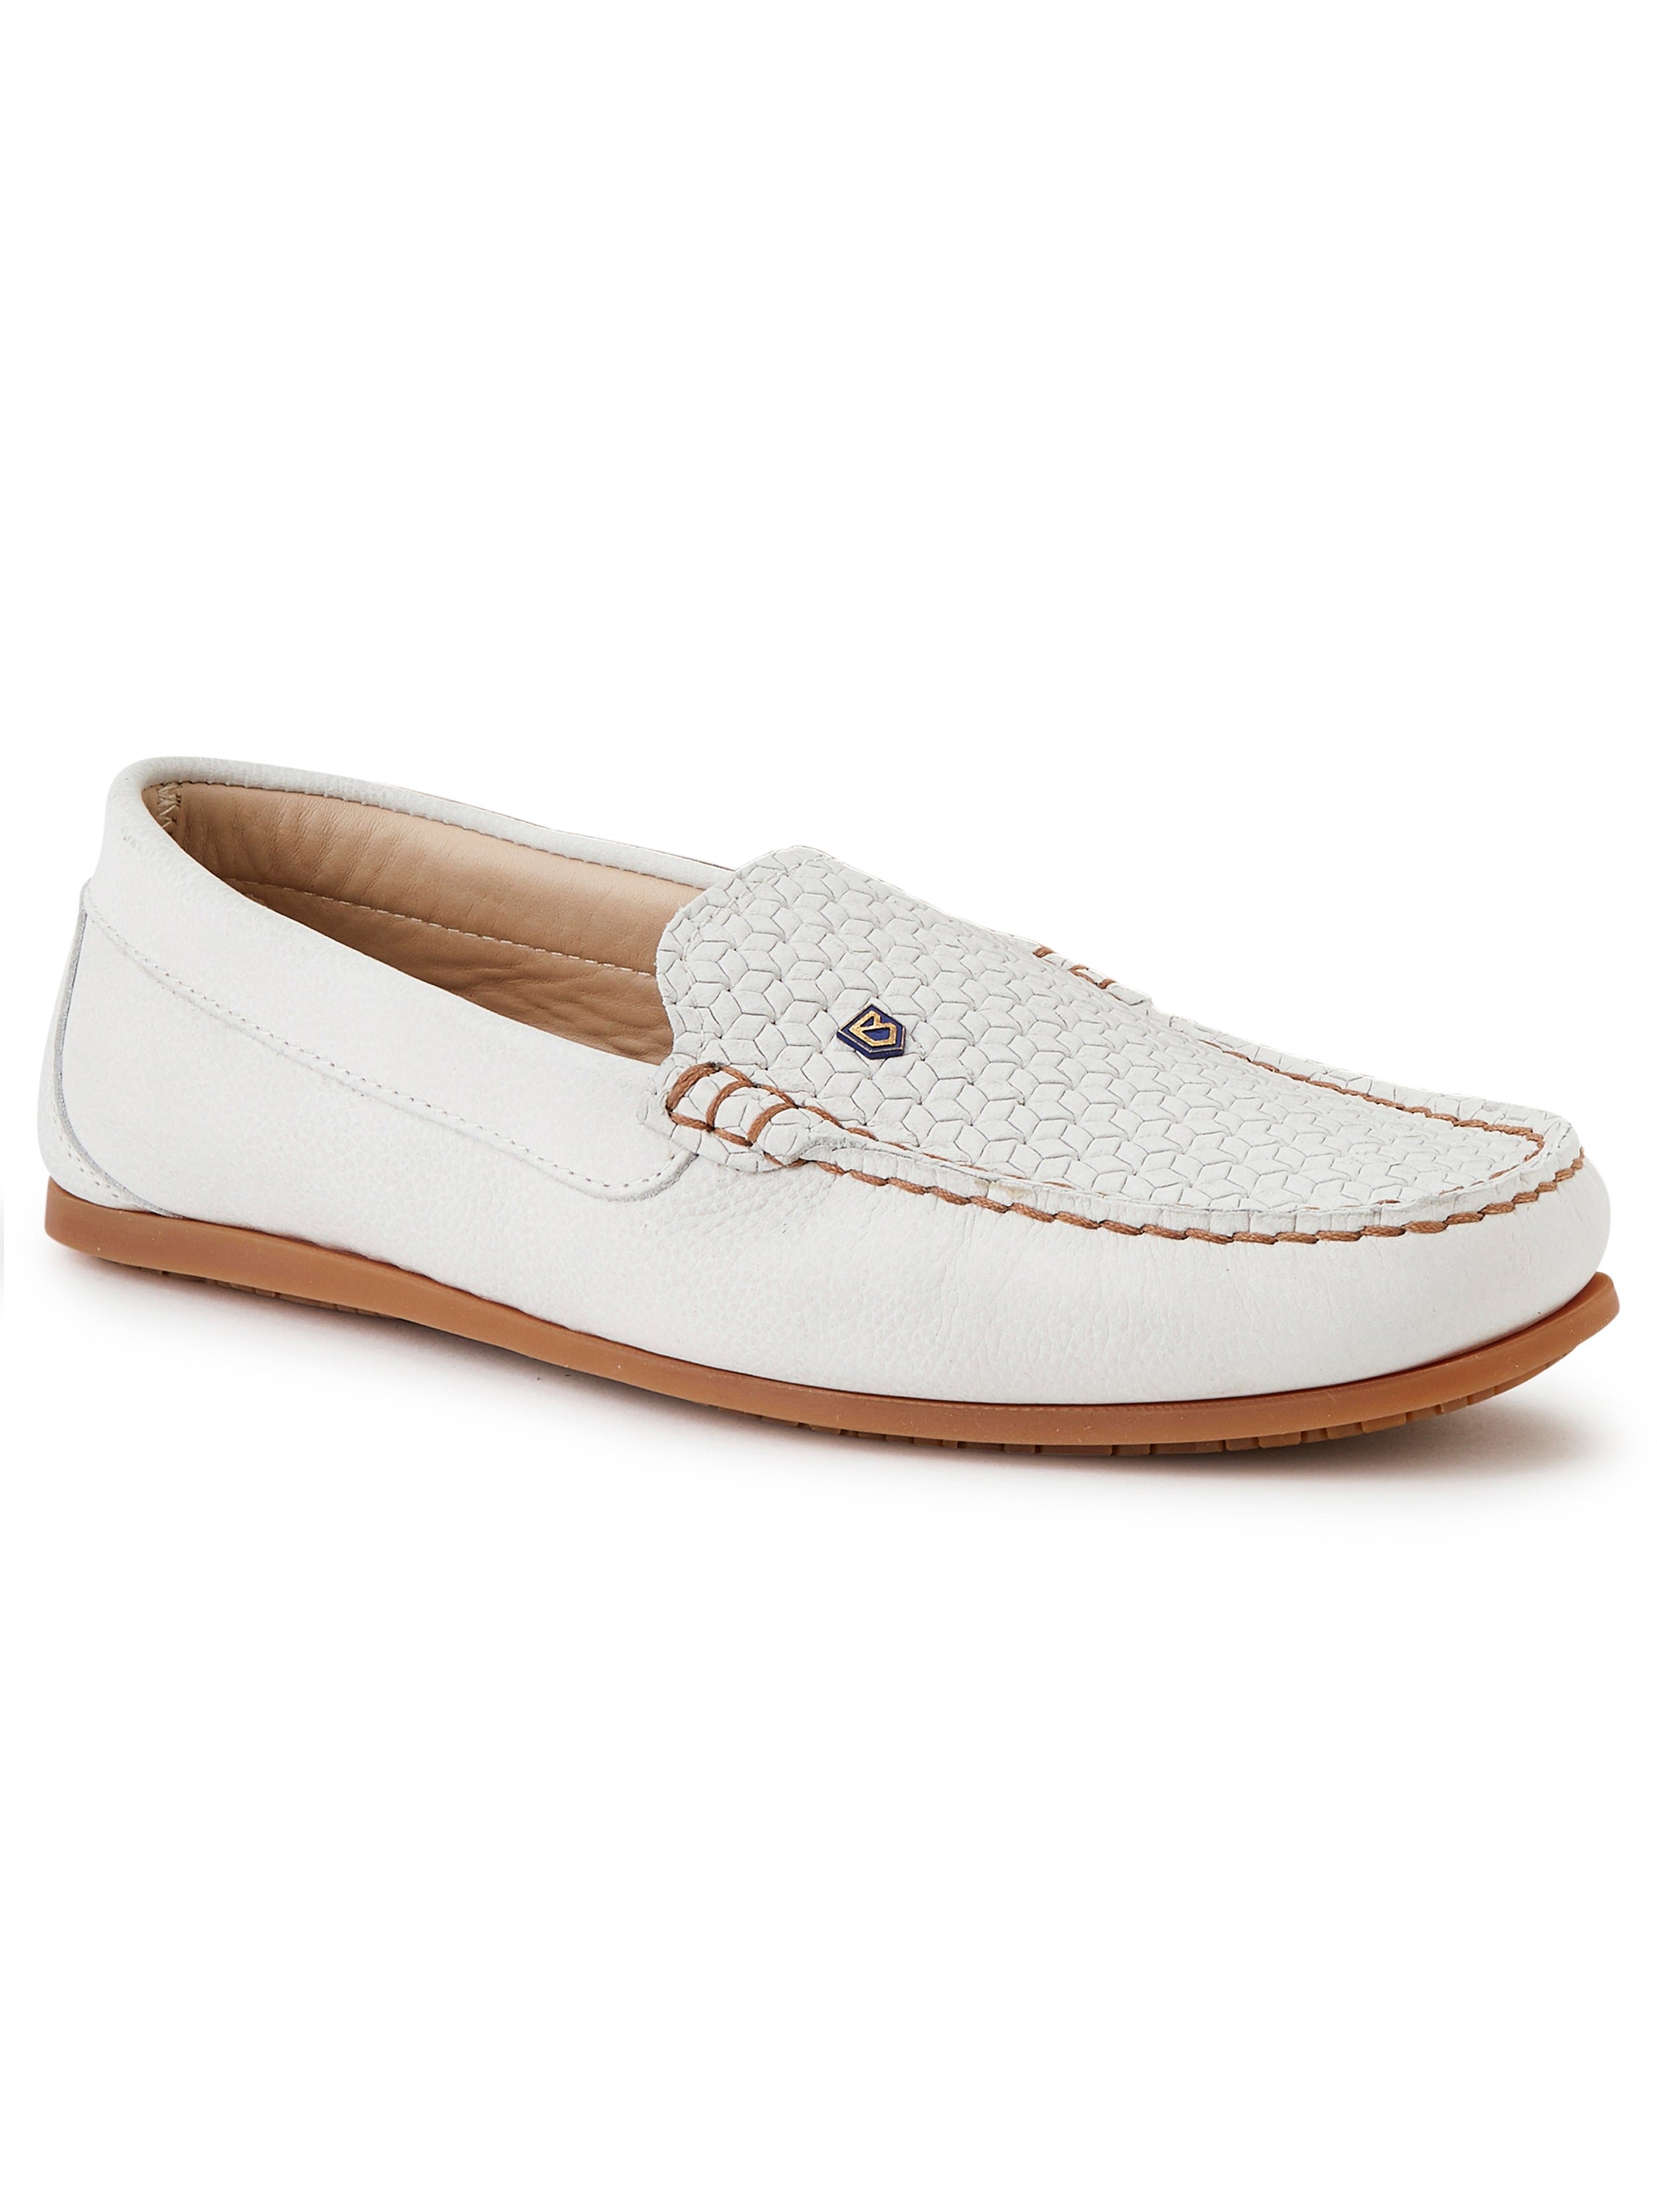 Dubarry Cannes Loafer - Sail White